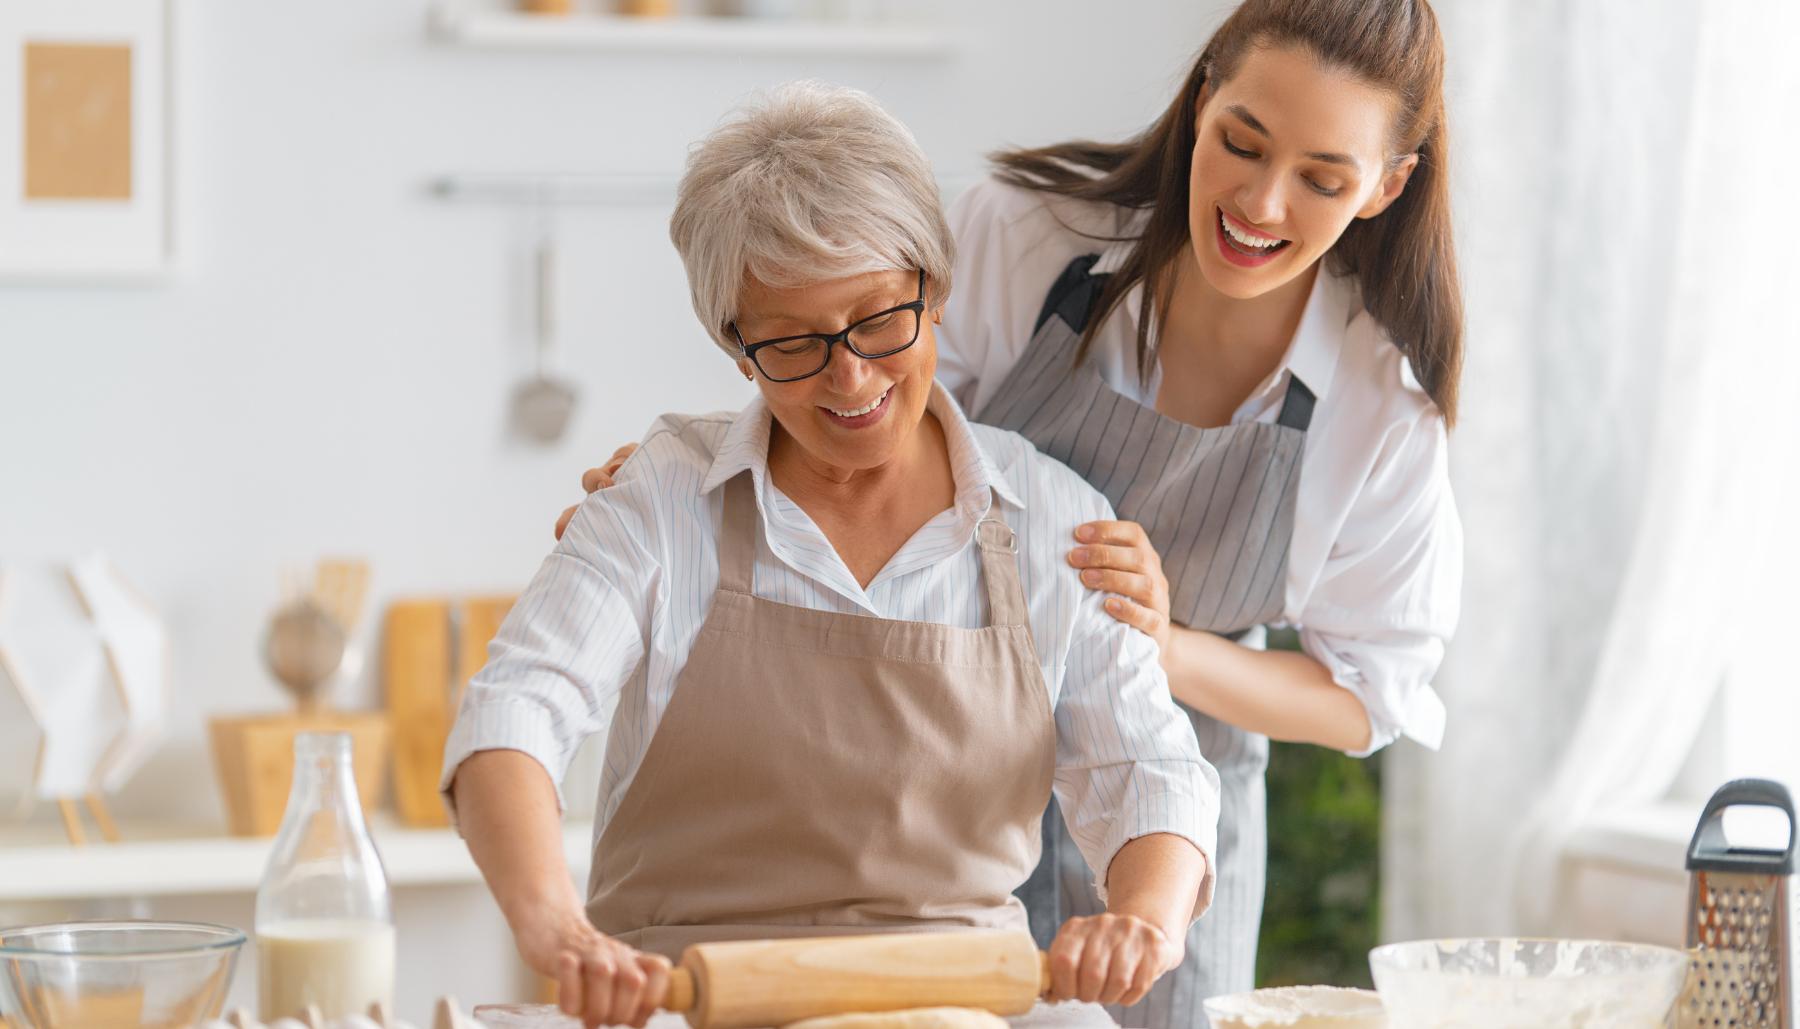 Young woman and older woman baking together